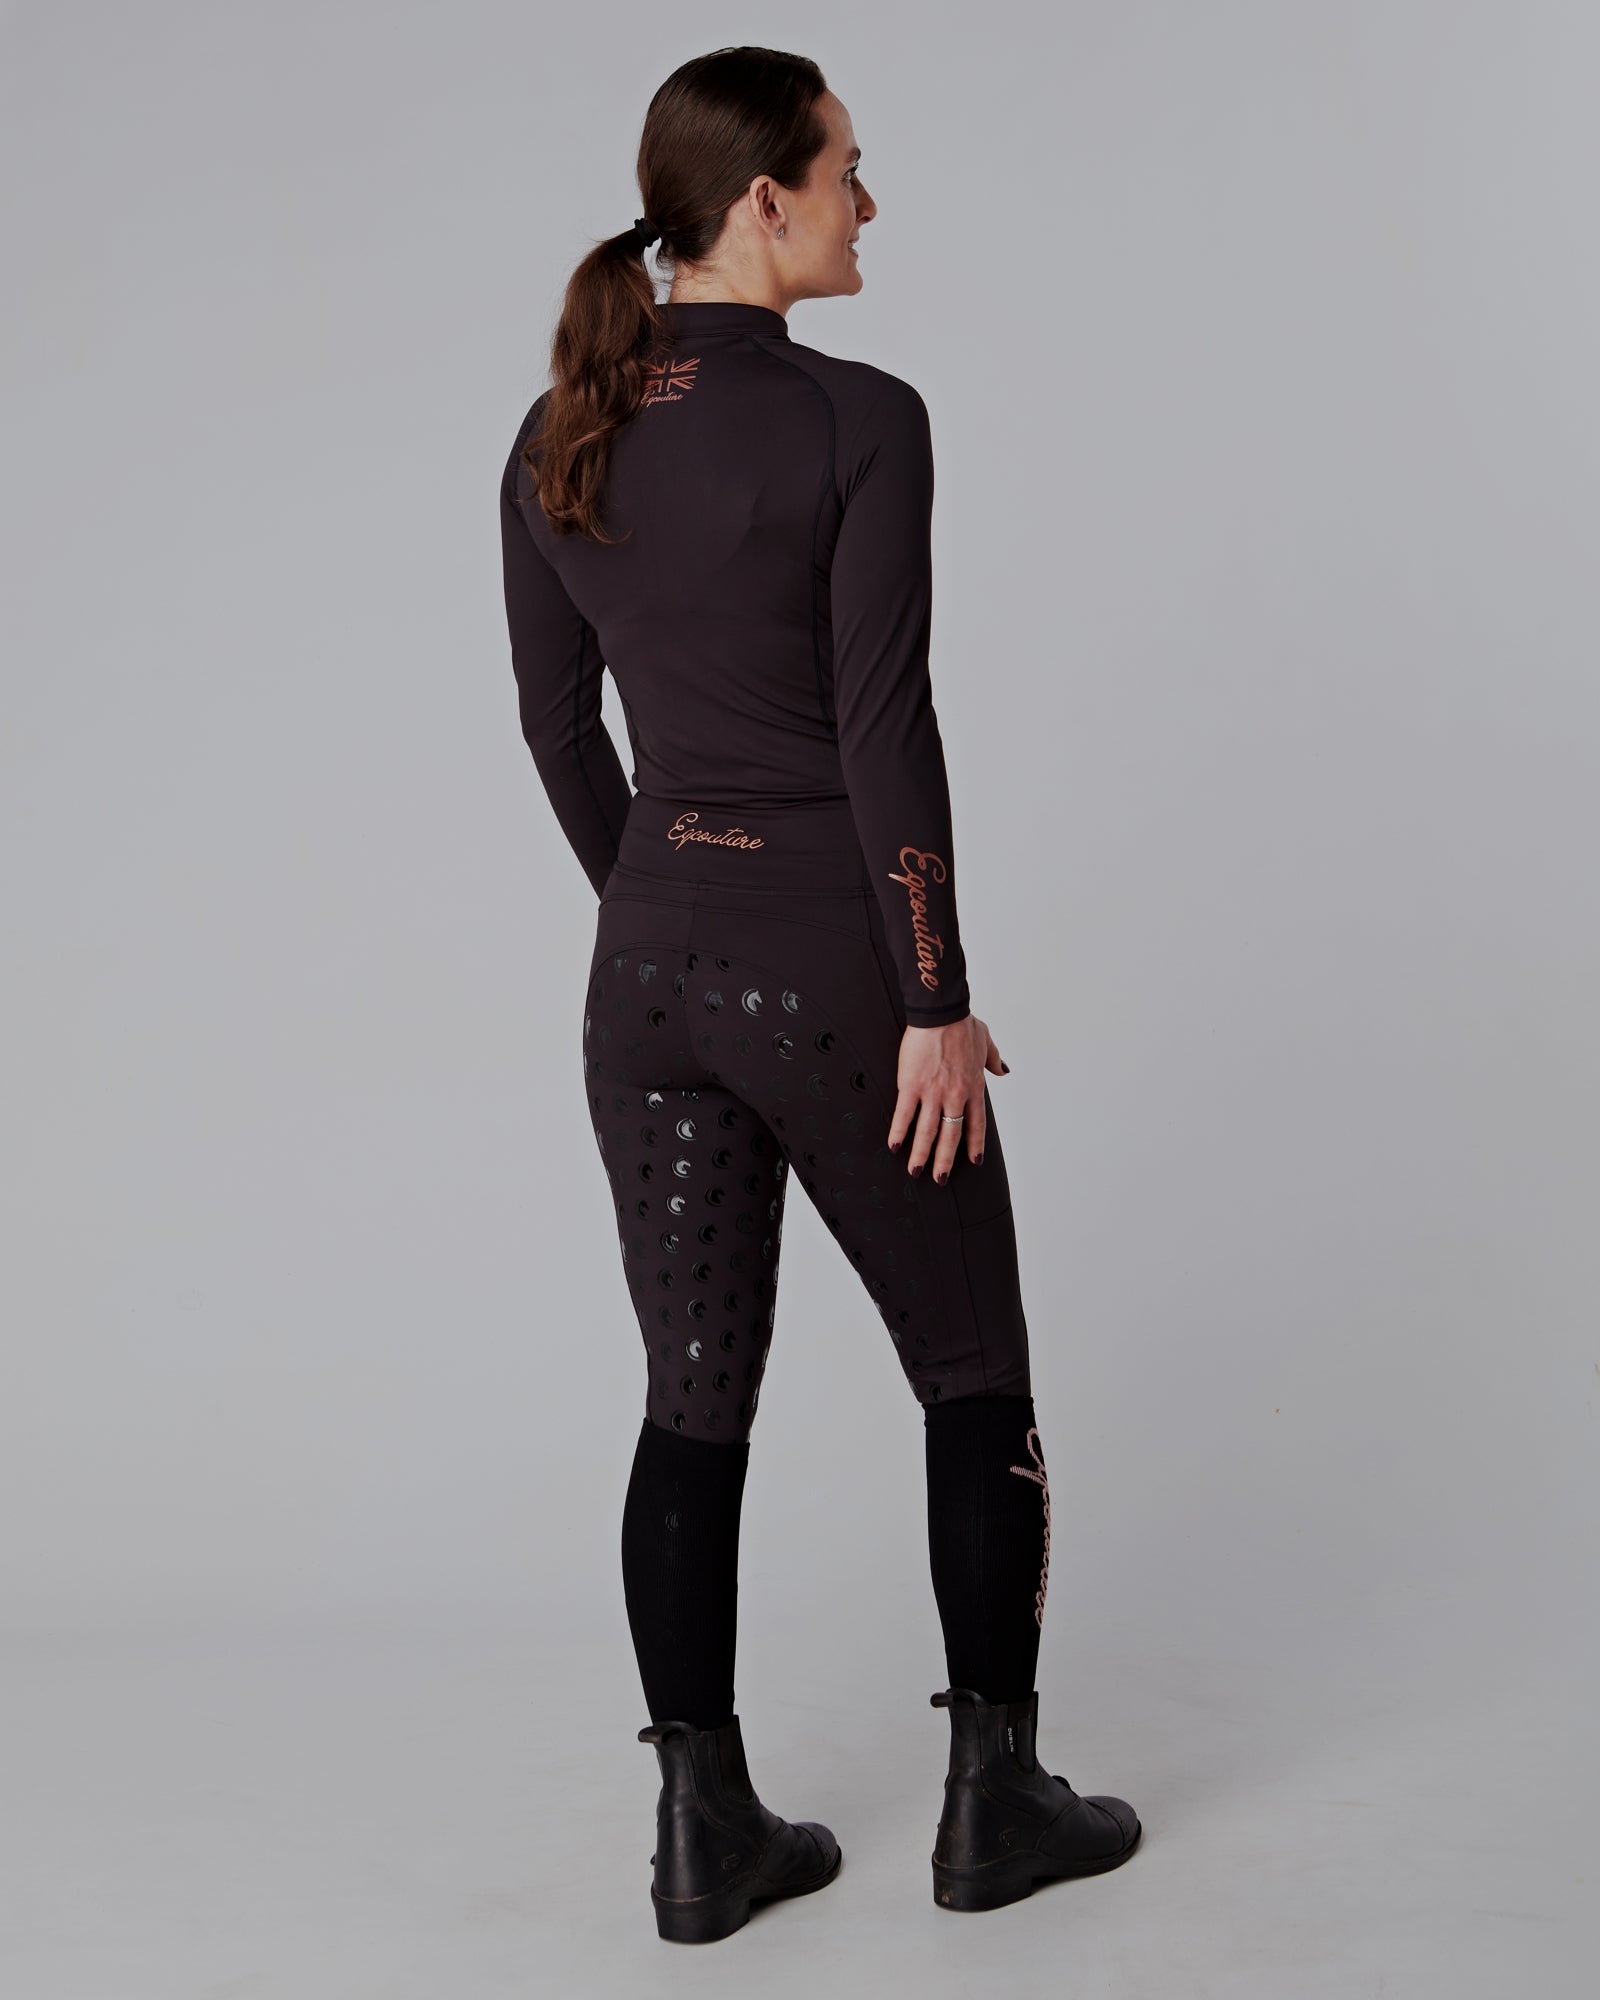 WINTER Thermal Rose Gold & Black Riding Leggings / Tights with Phone Pockets - WATER RESISTANT